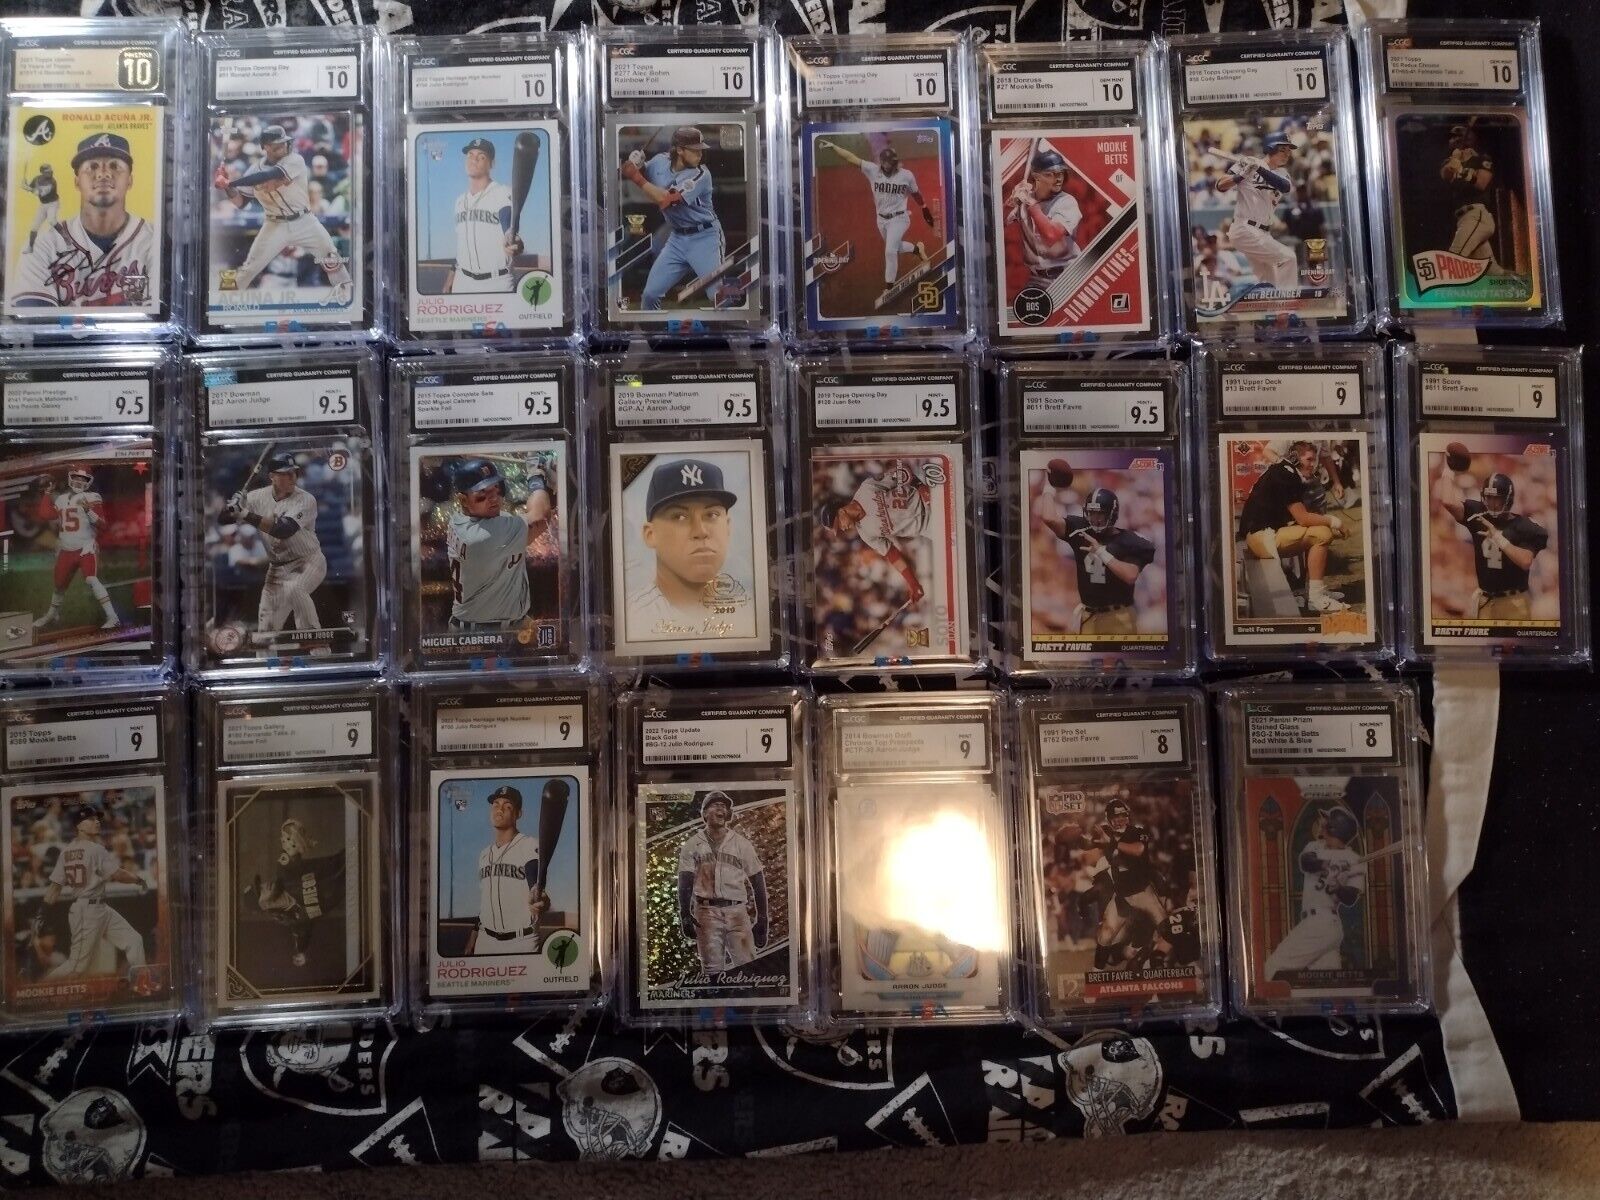 23 cards graded Lot high marks graded card lot, lots of 10s check the pictures 